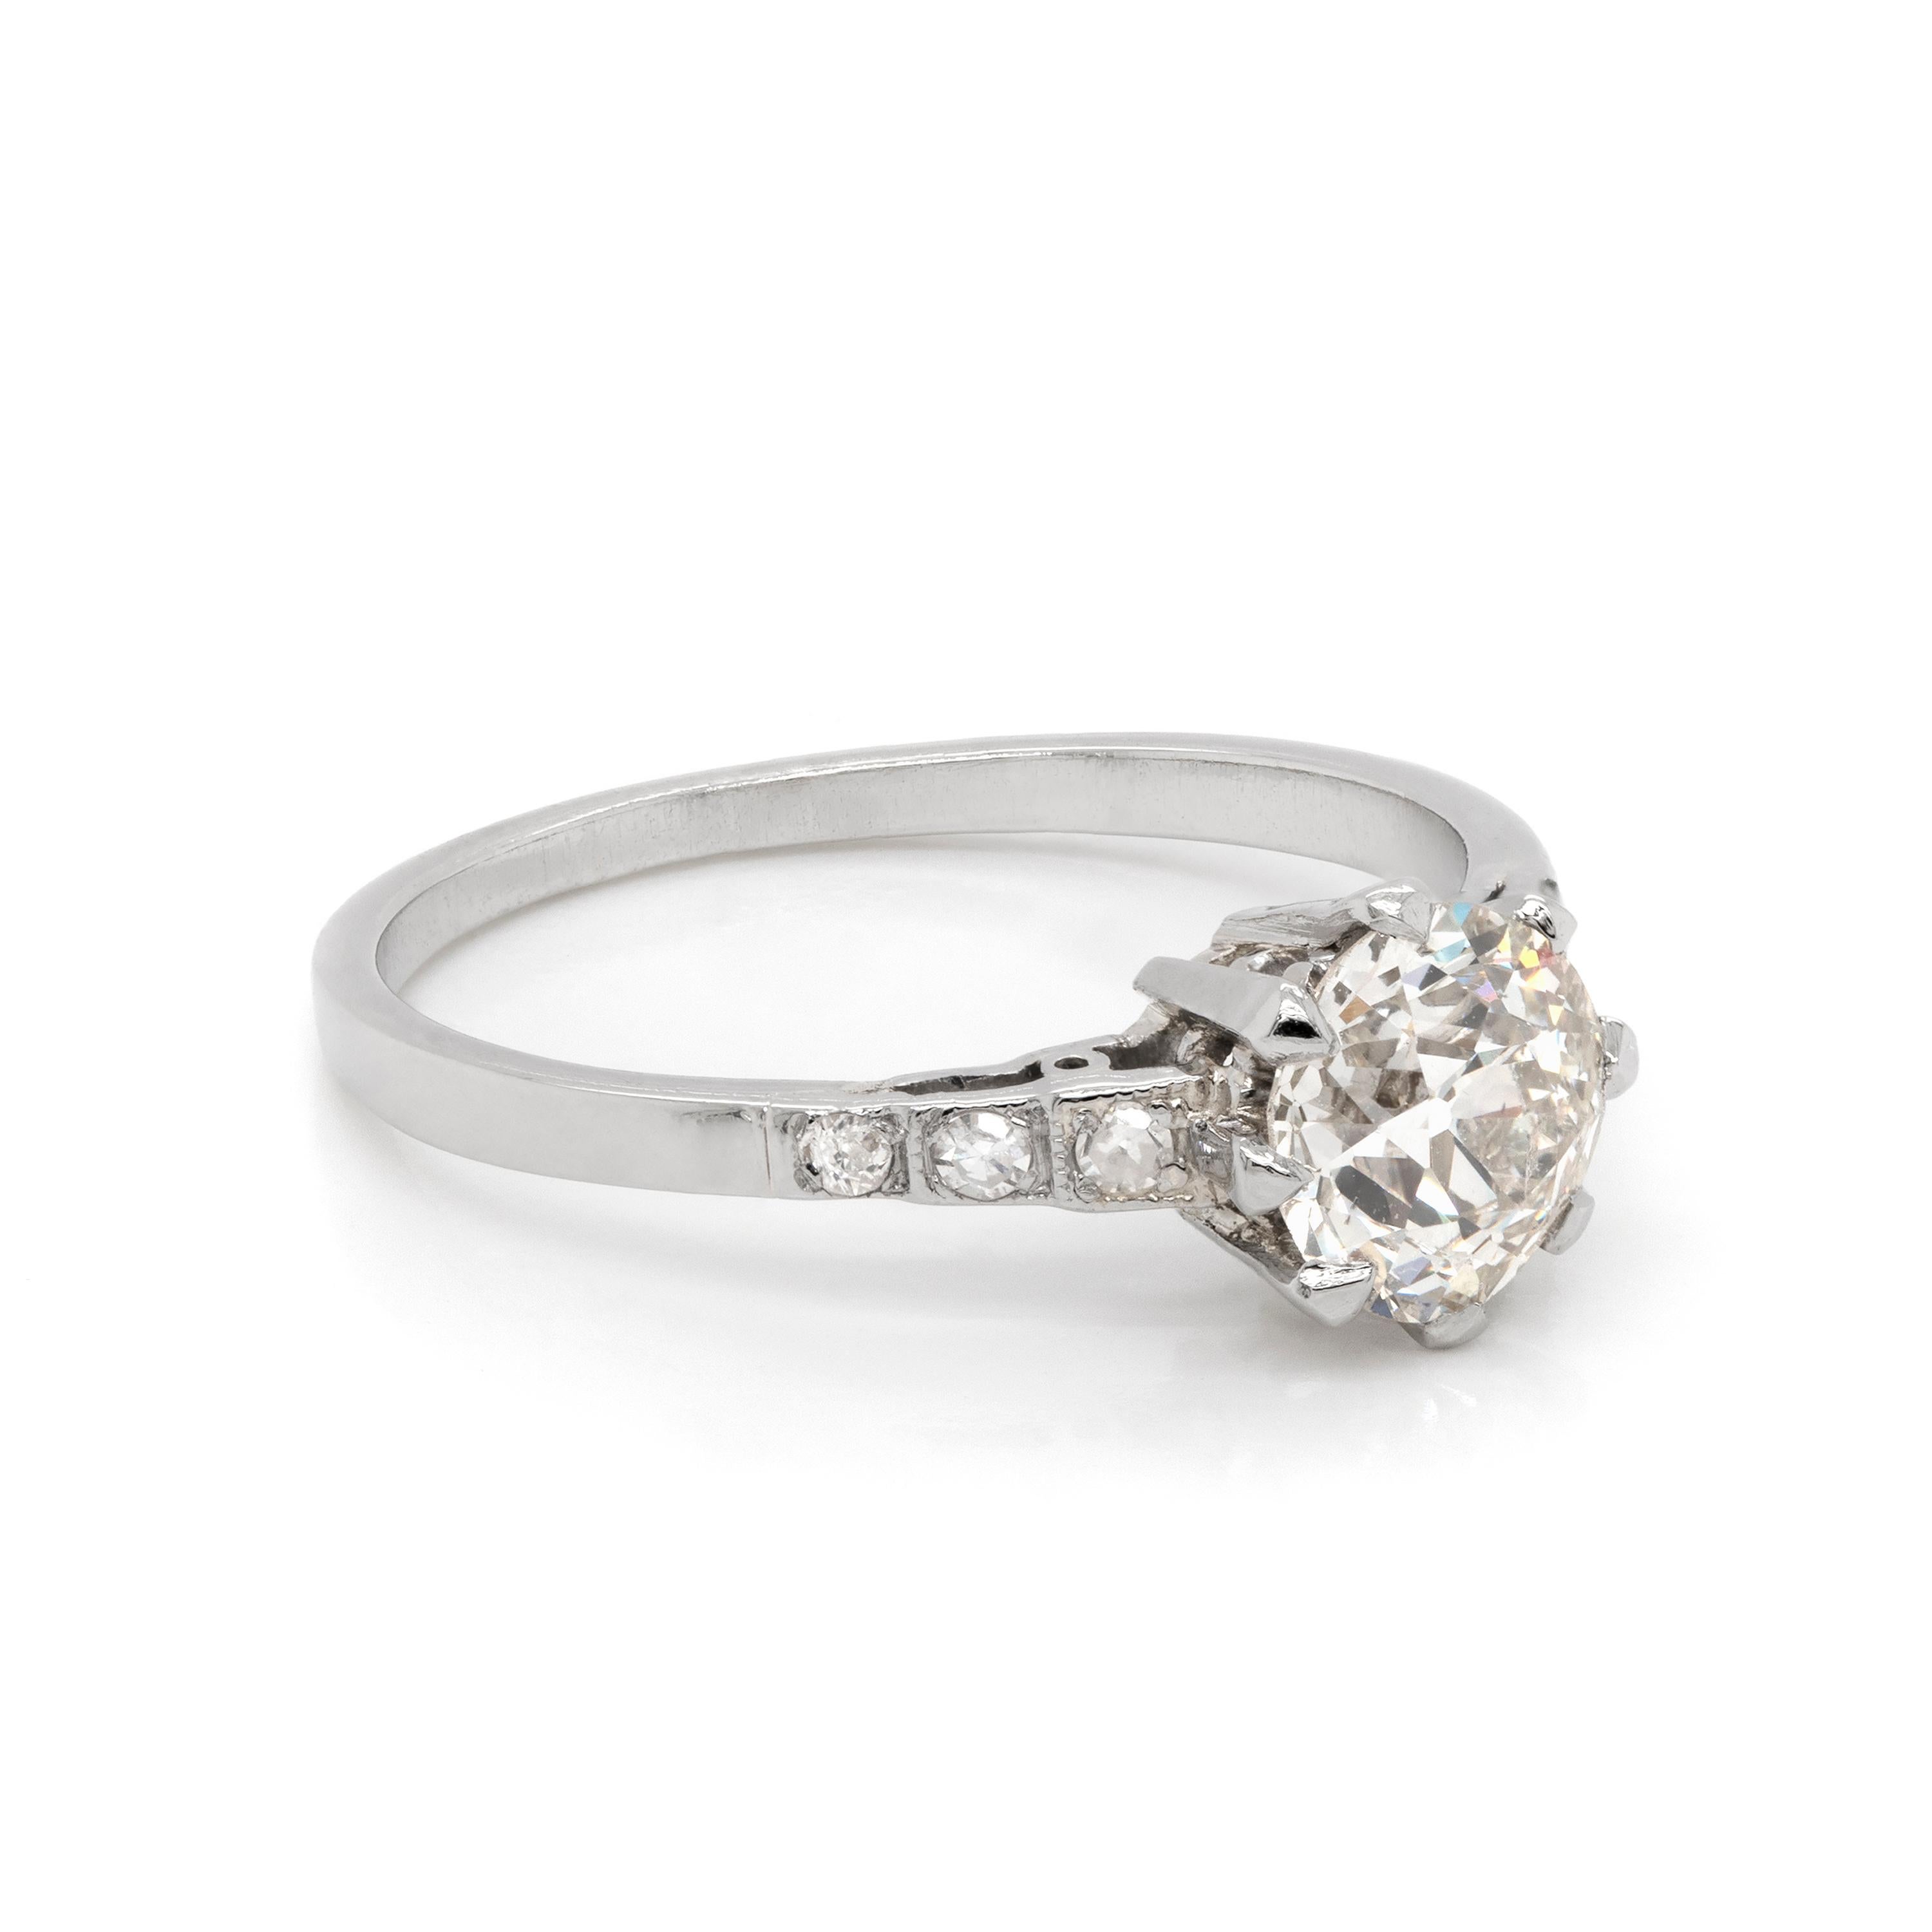 This beautiful antique engagement ring features a 1.15ct old mine cut diamond in the centre, set in an eight claw, open back platinum mount. The shoulders are set with three old European cut diamonds on either side, weighing approximately 0.10